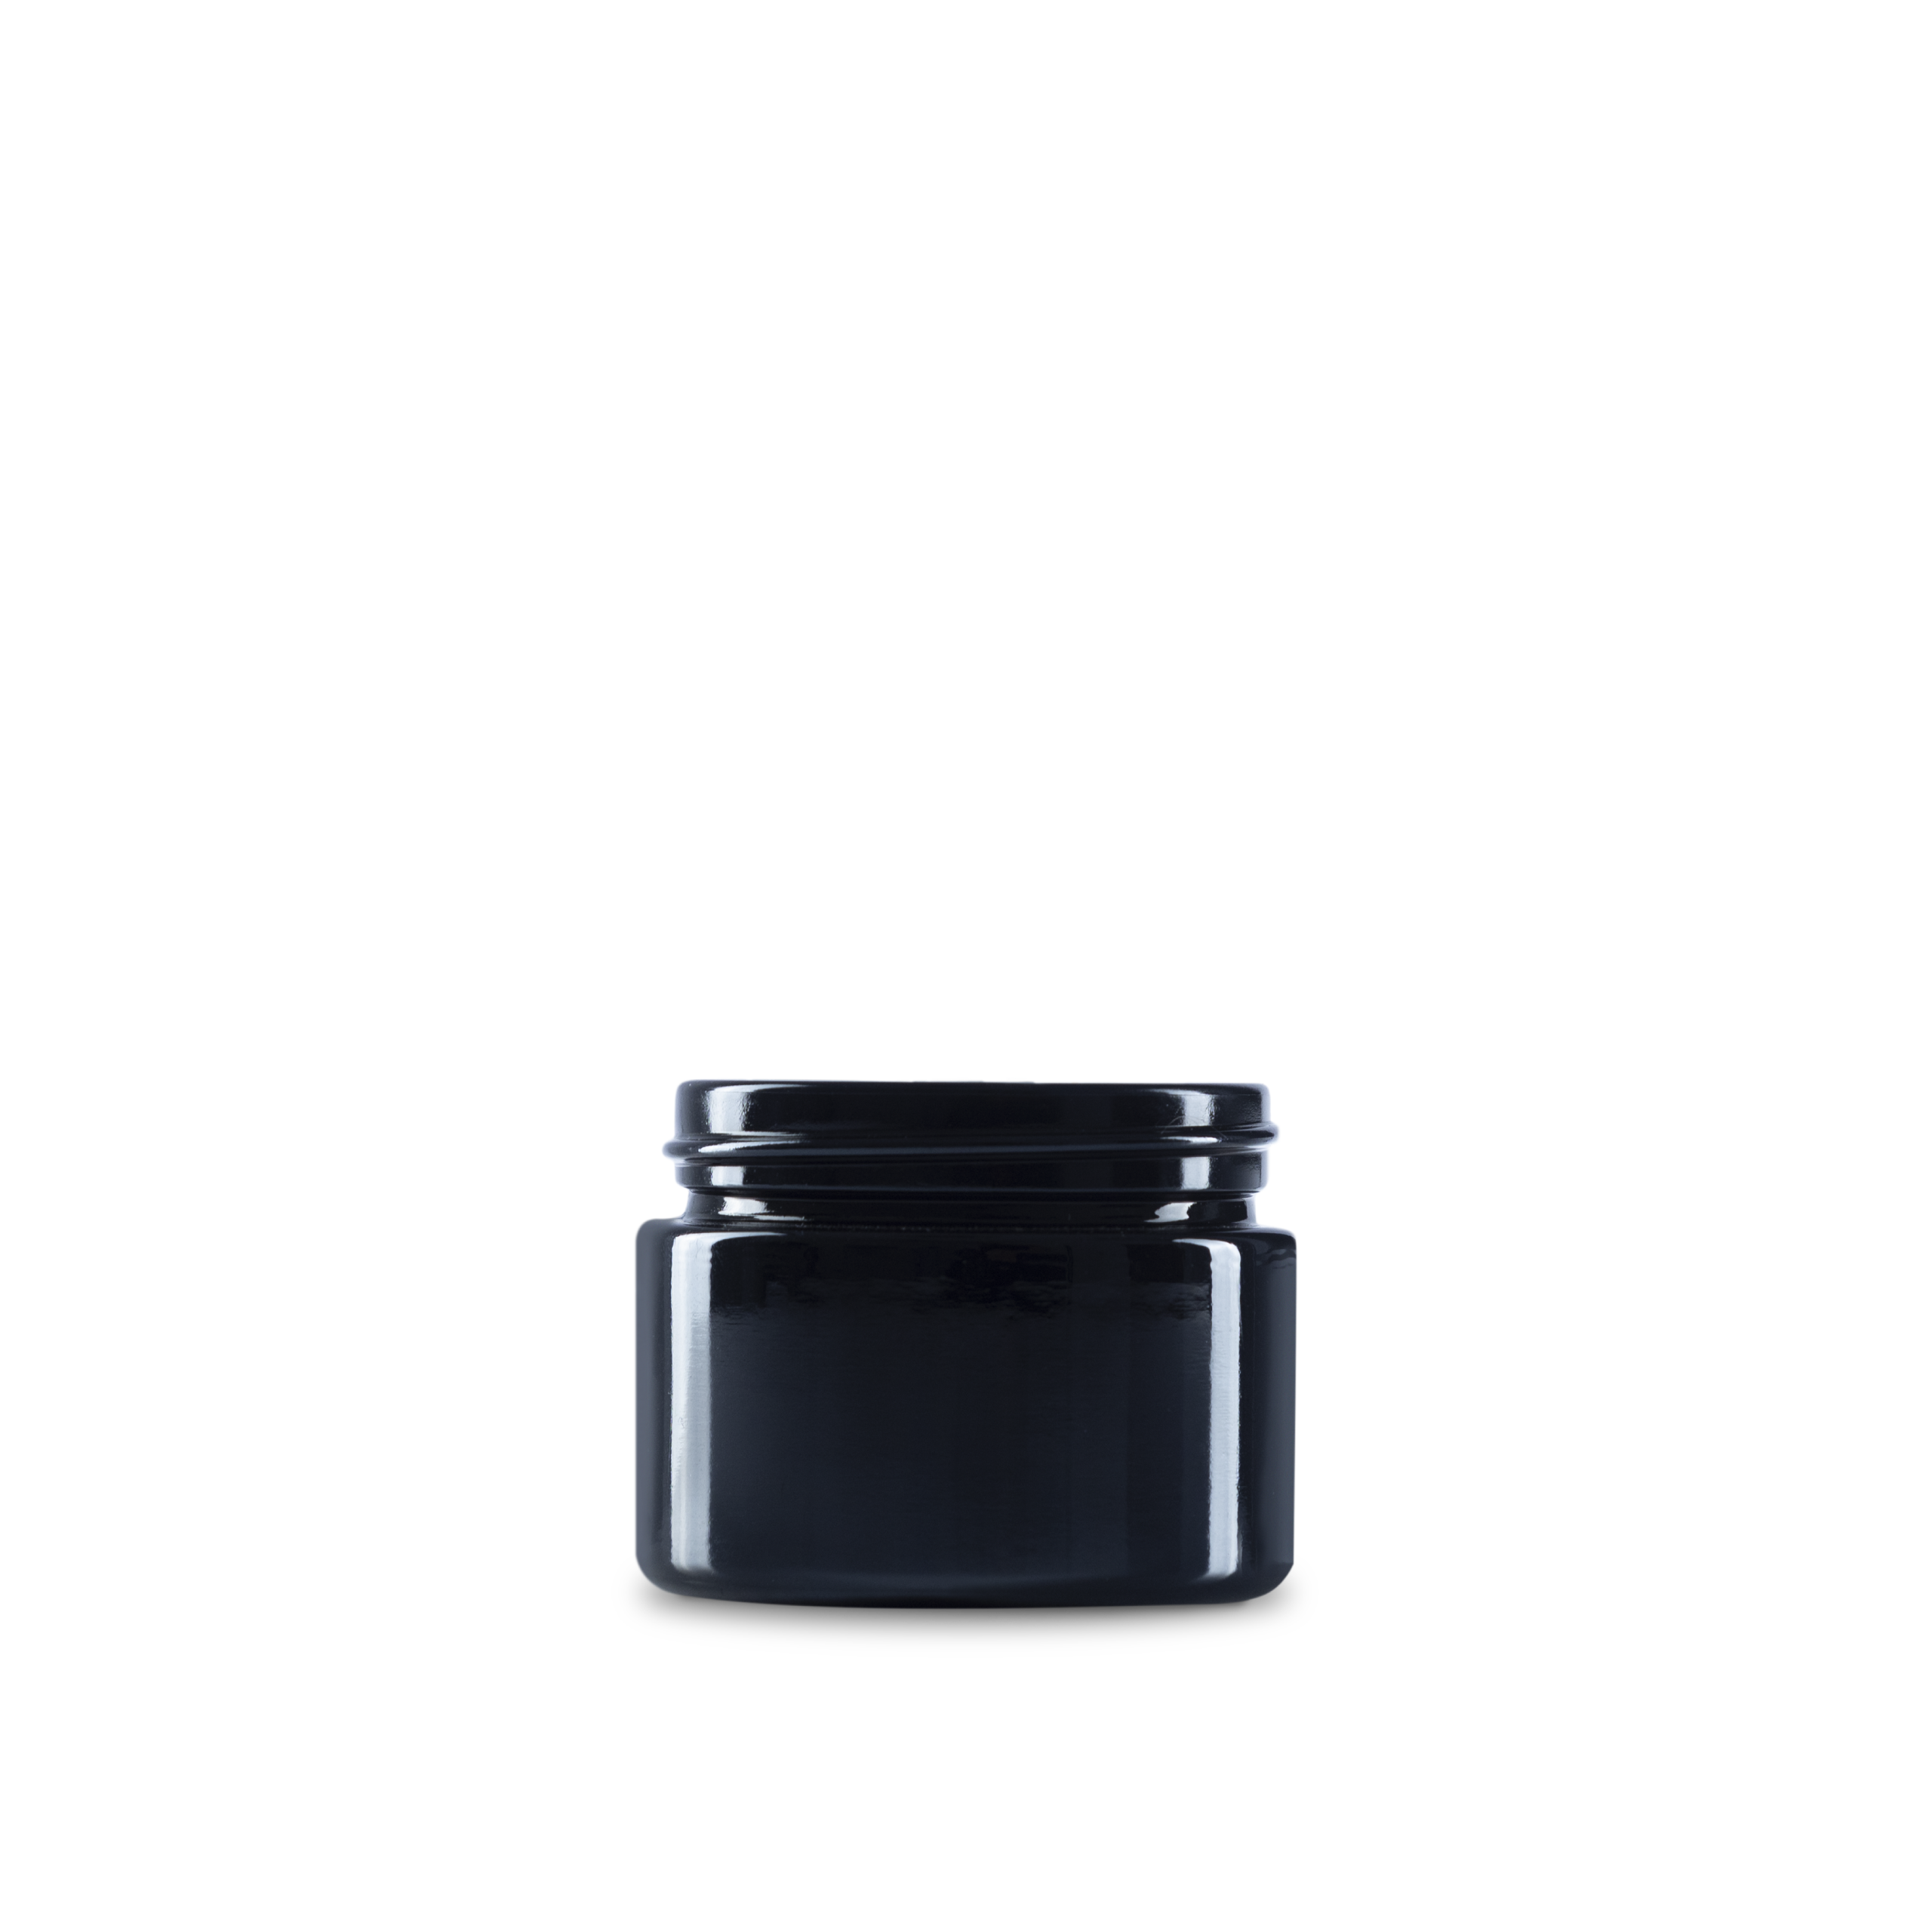 2 oz black uv straight sided glass round jars are excellent for storing and displaying your herbs. 